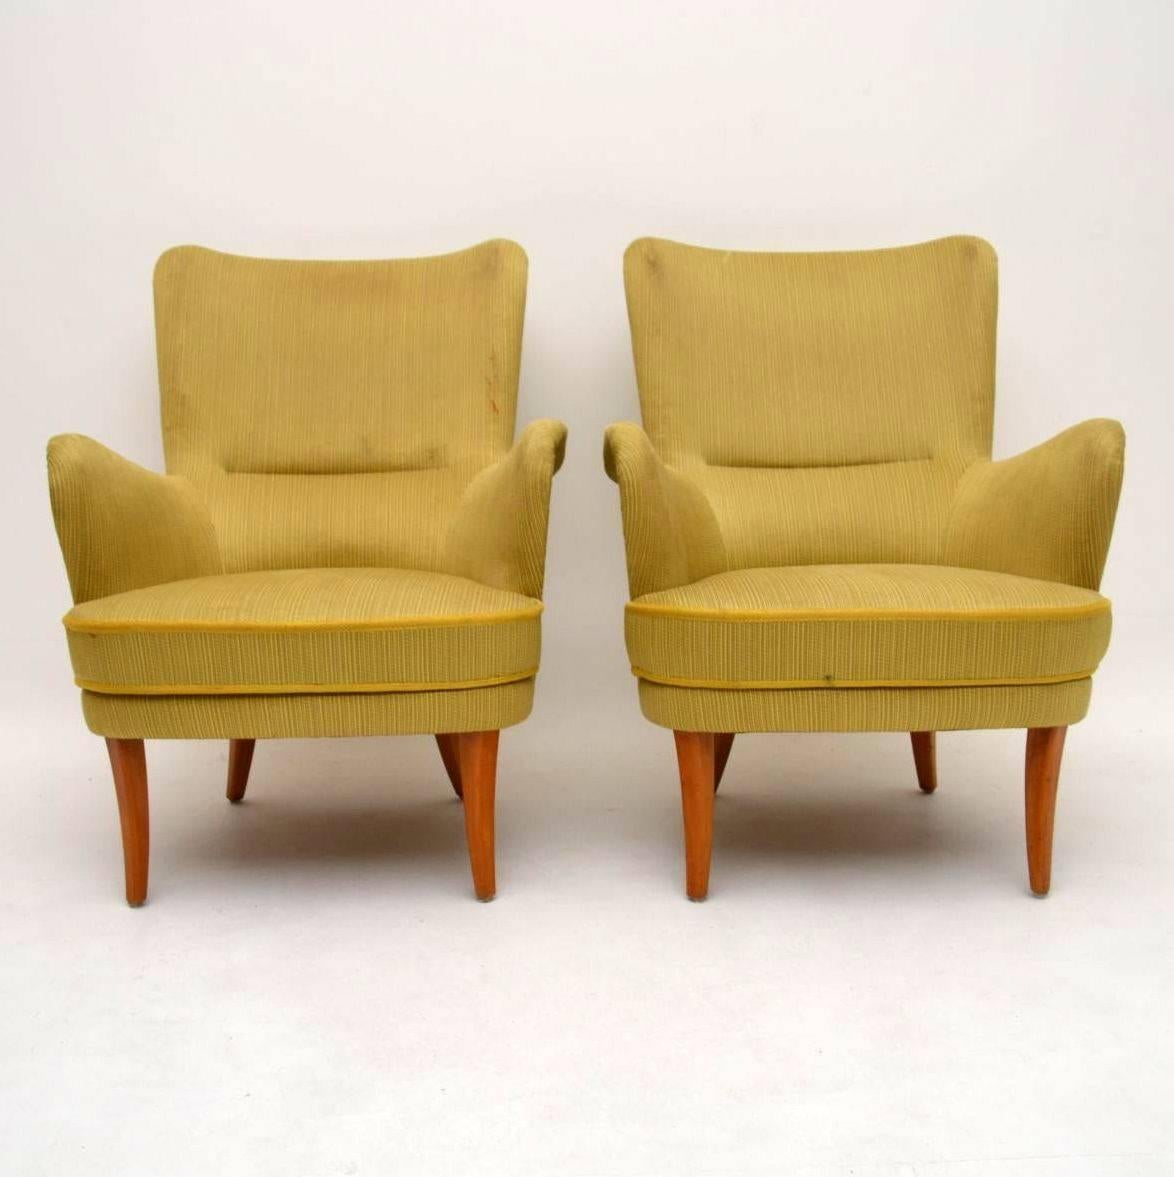 A stunning pair of vintage armchairs made in Sweden, these date from the 1960s, they were designed by Carl Malmsten. The fabric is original and needs to be replaced, the price is for the chairs as seen. If you’d like us to re-upholster them please